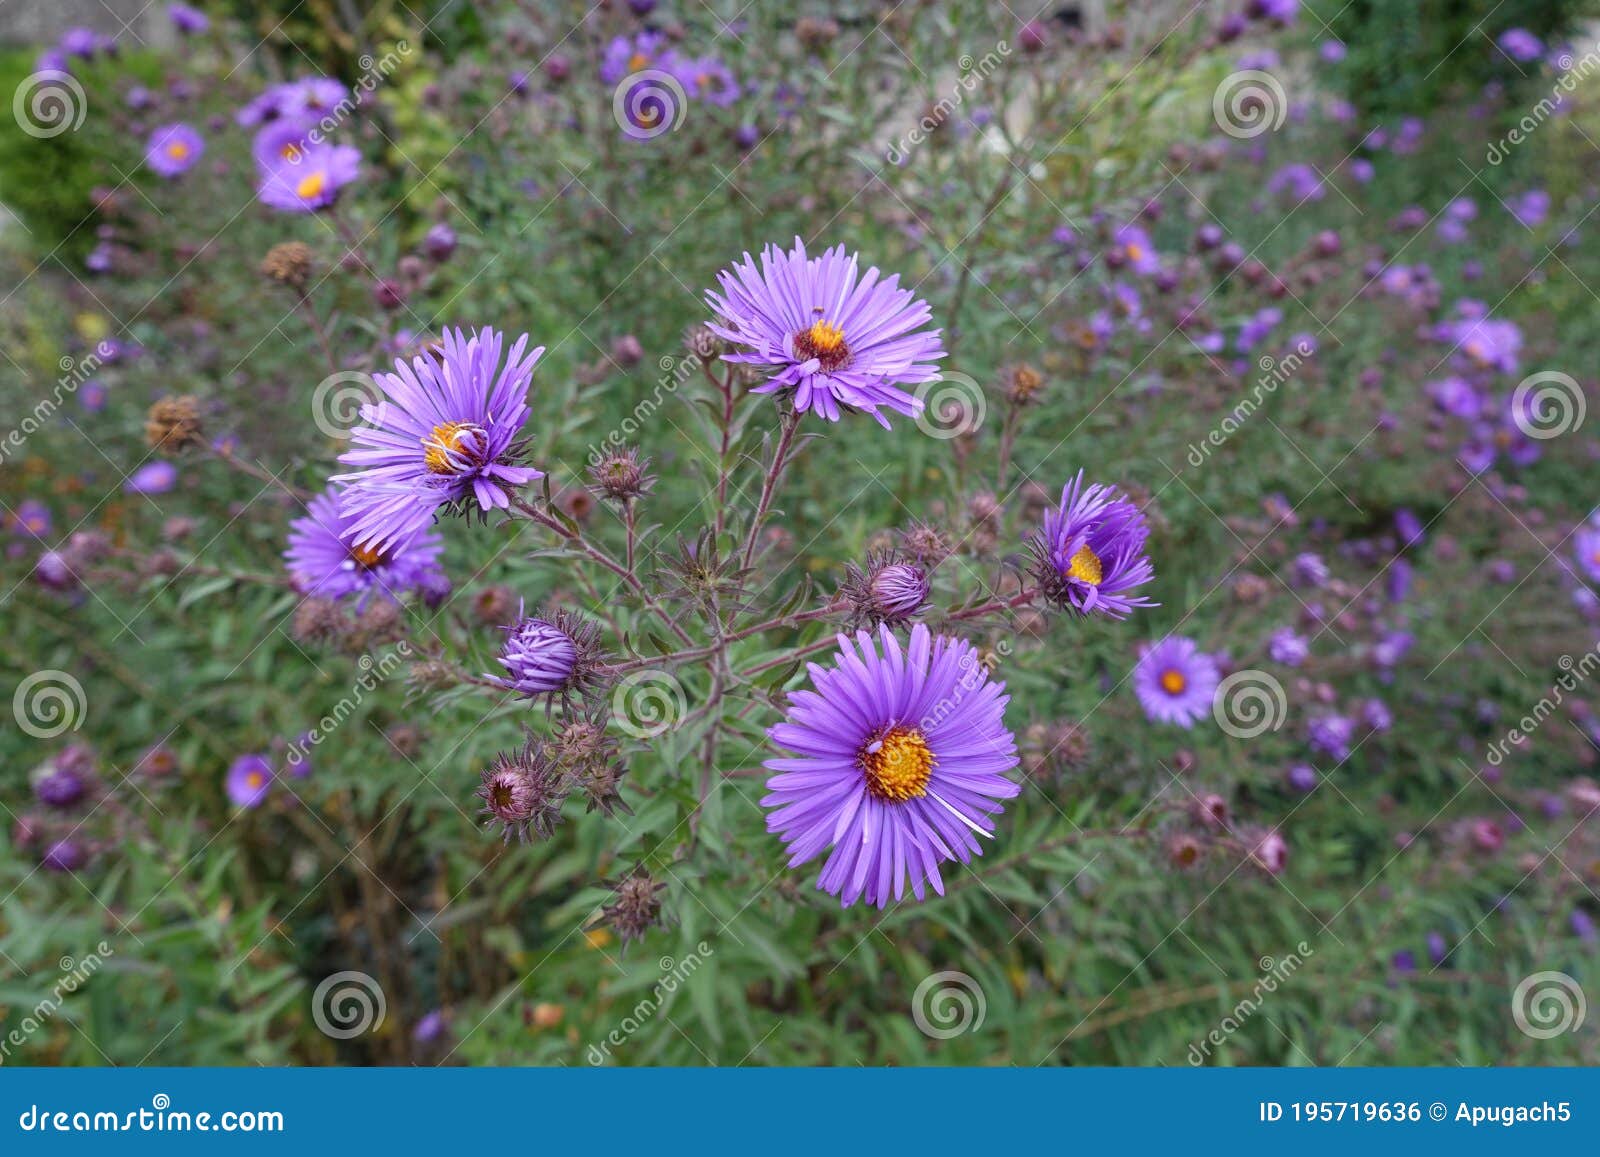 buds and purple flowers of new england aster